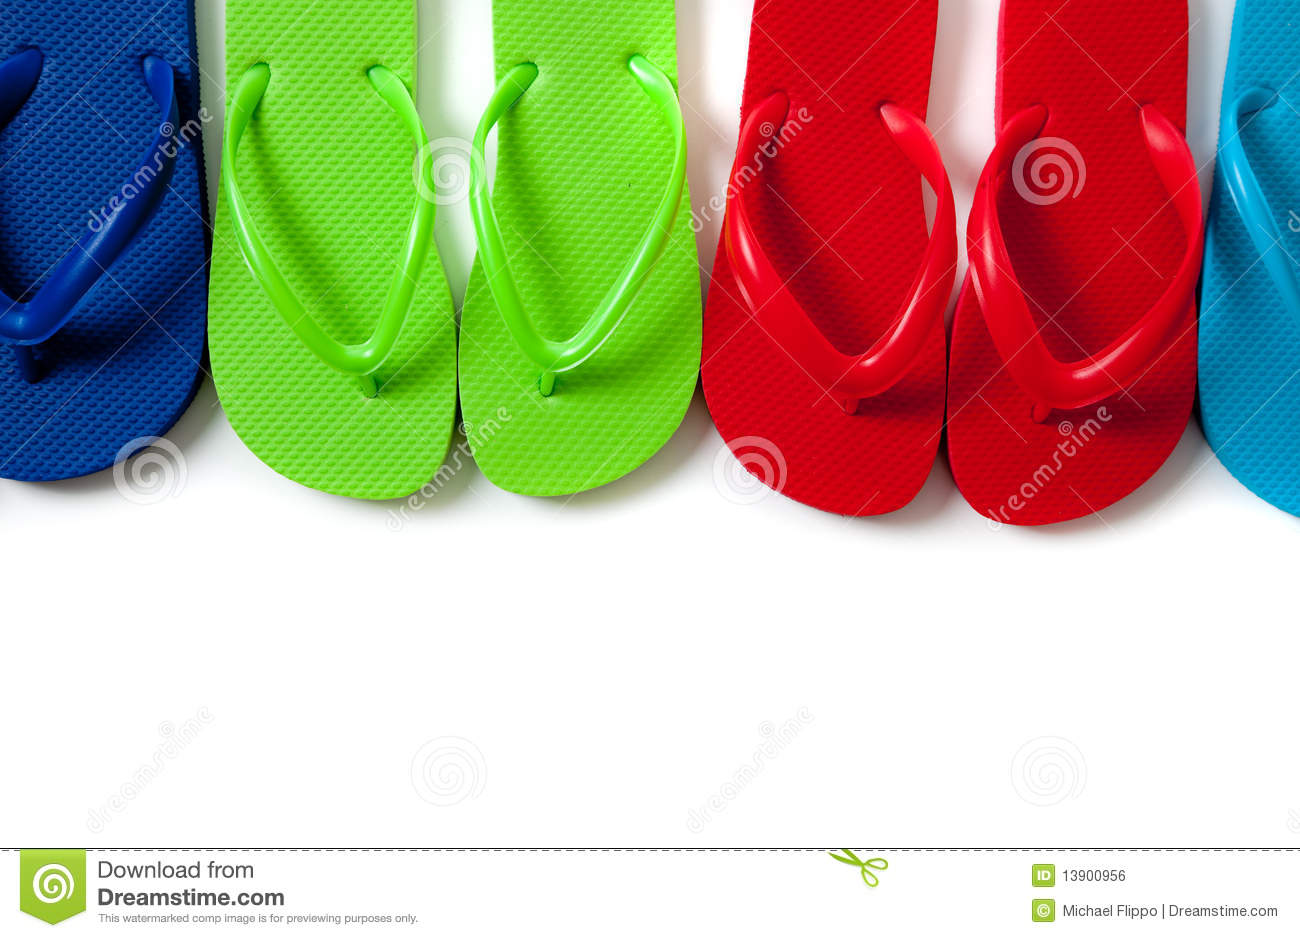 Colored Flipflops On A White Background Royalty Free Stock Image